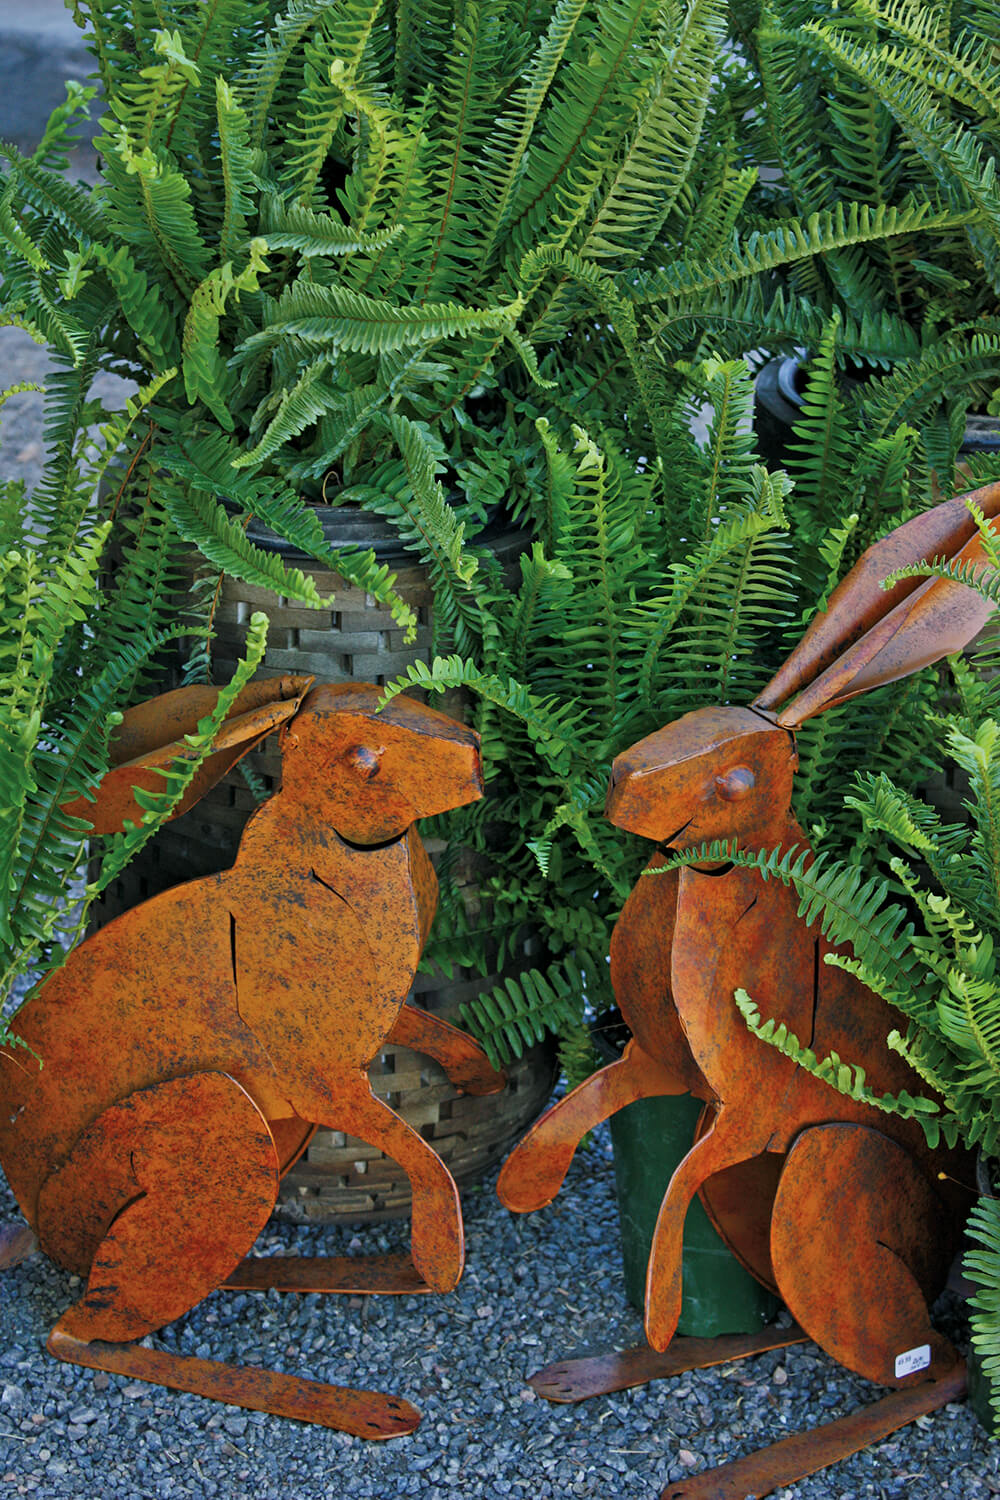 a fern and bunny ornaments